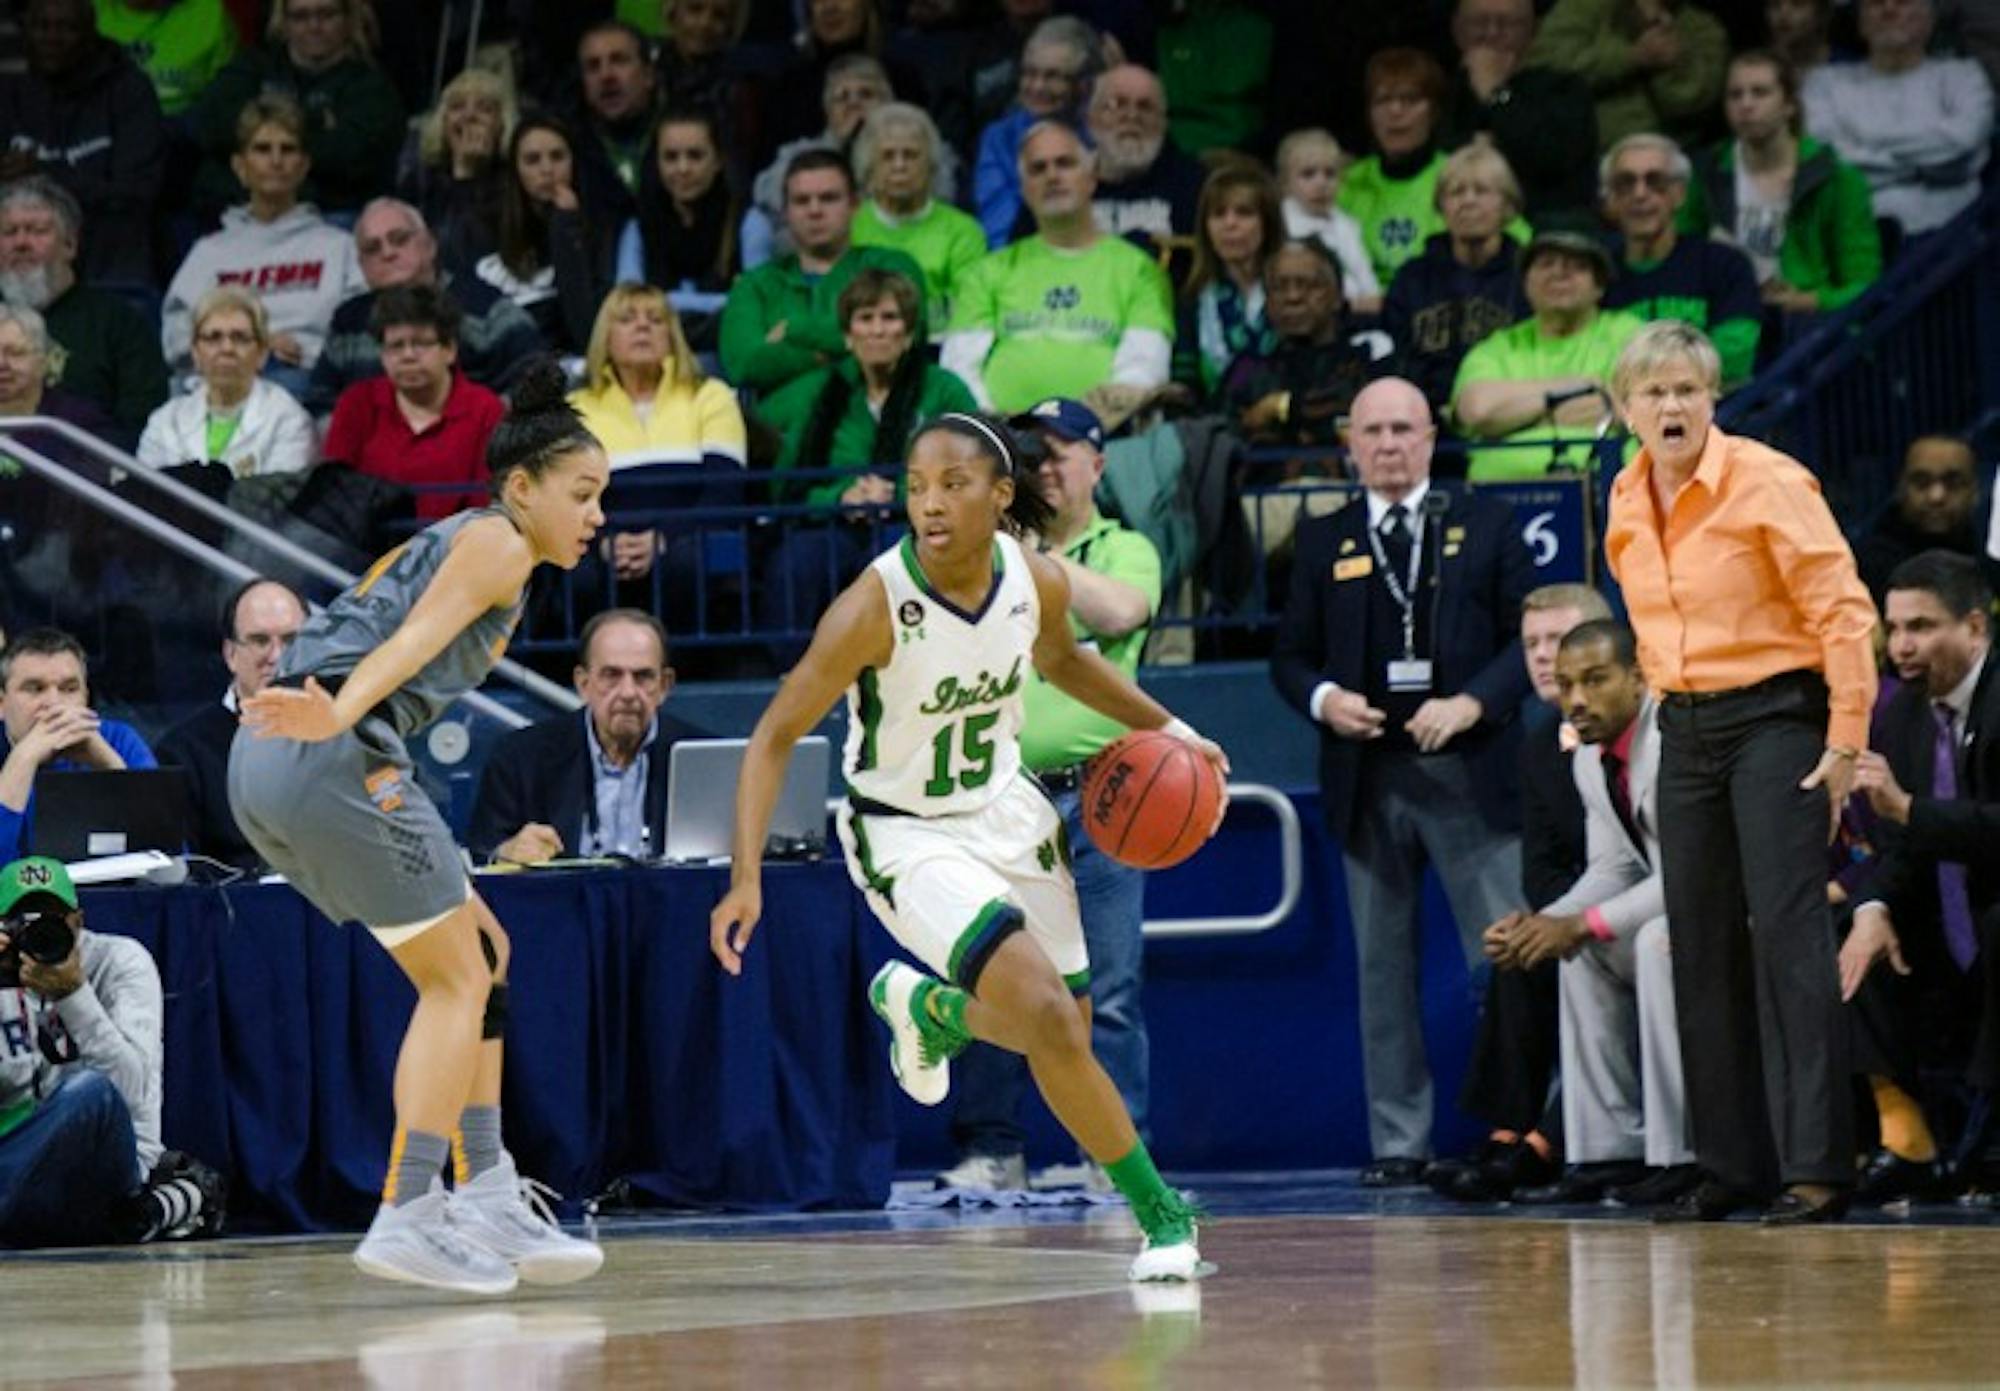 Irish junior guard Lindsay Allen surveys the court during Notre Dame’s 79-66 win over Tennessee on Monday at Purcell Pavilion. Allen scored 10 points and had a team-high seven assists for the Irish.